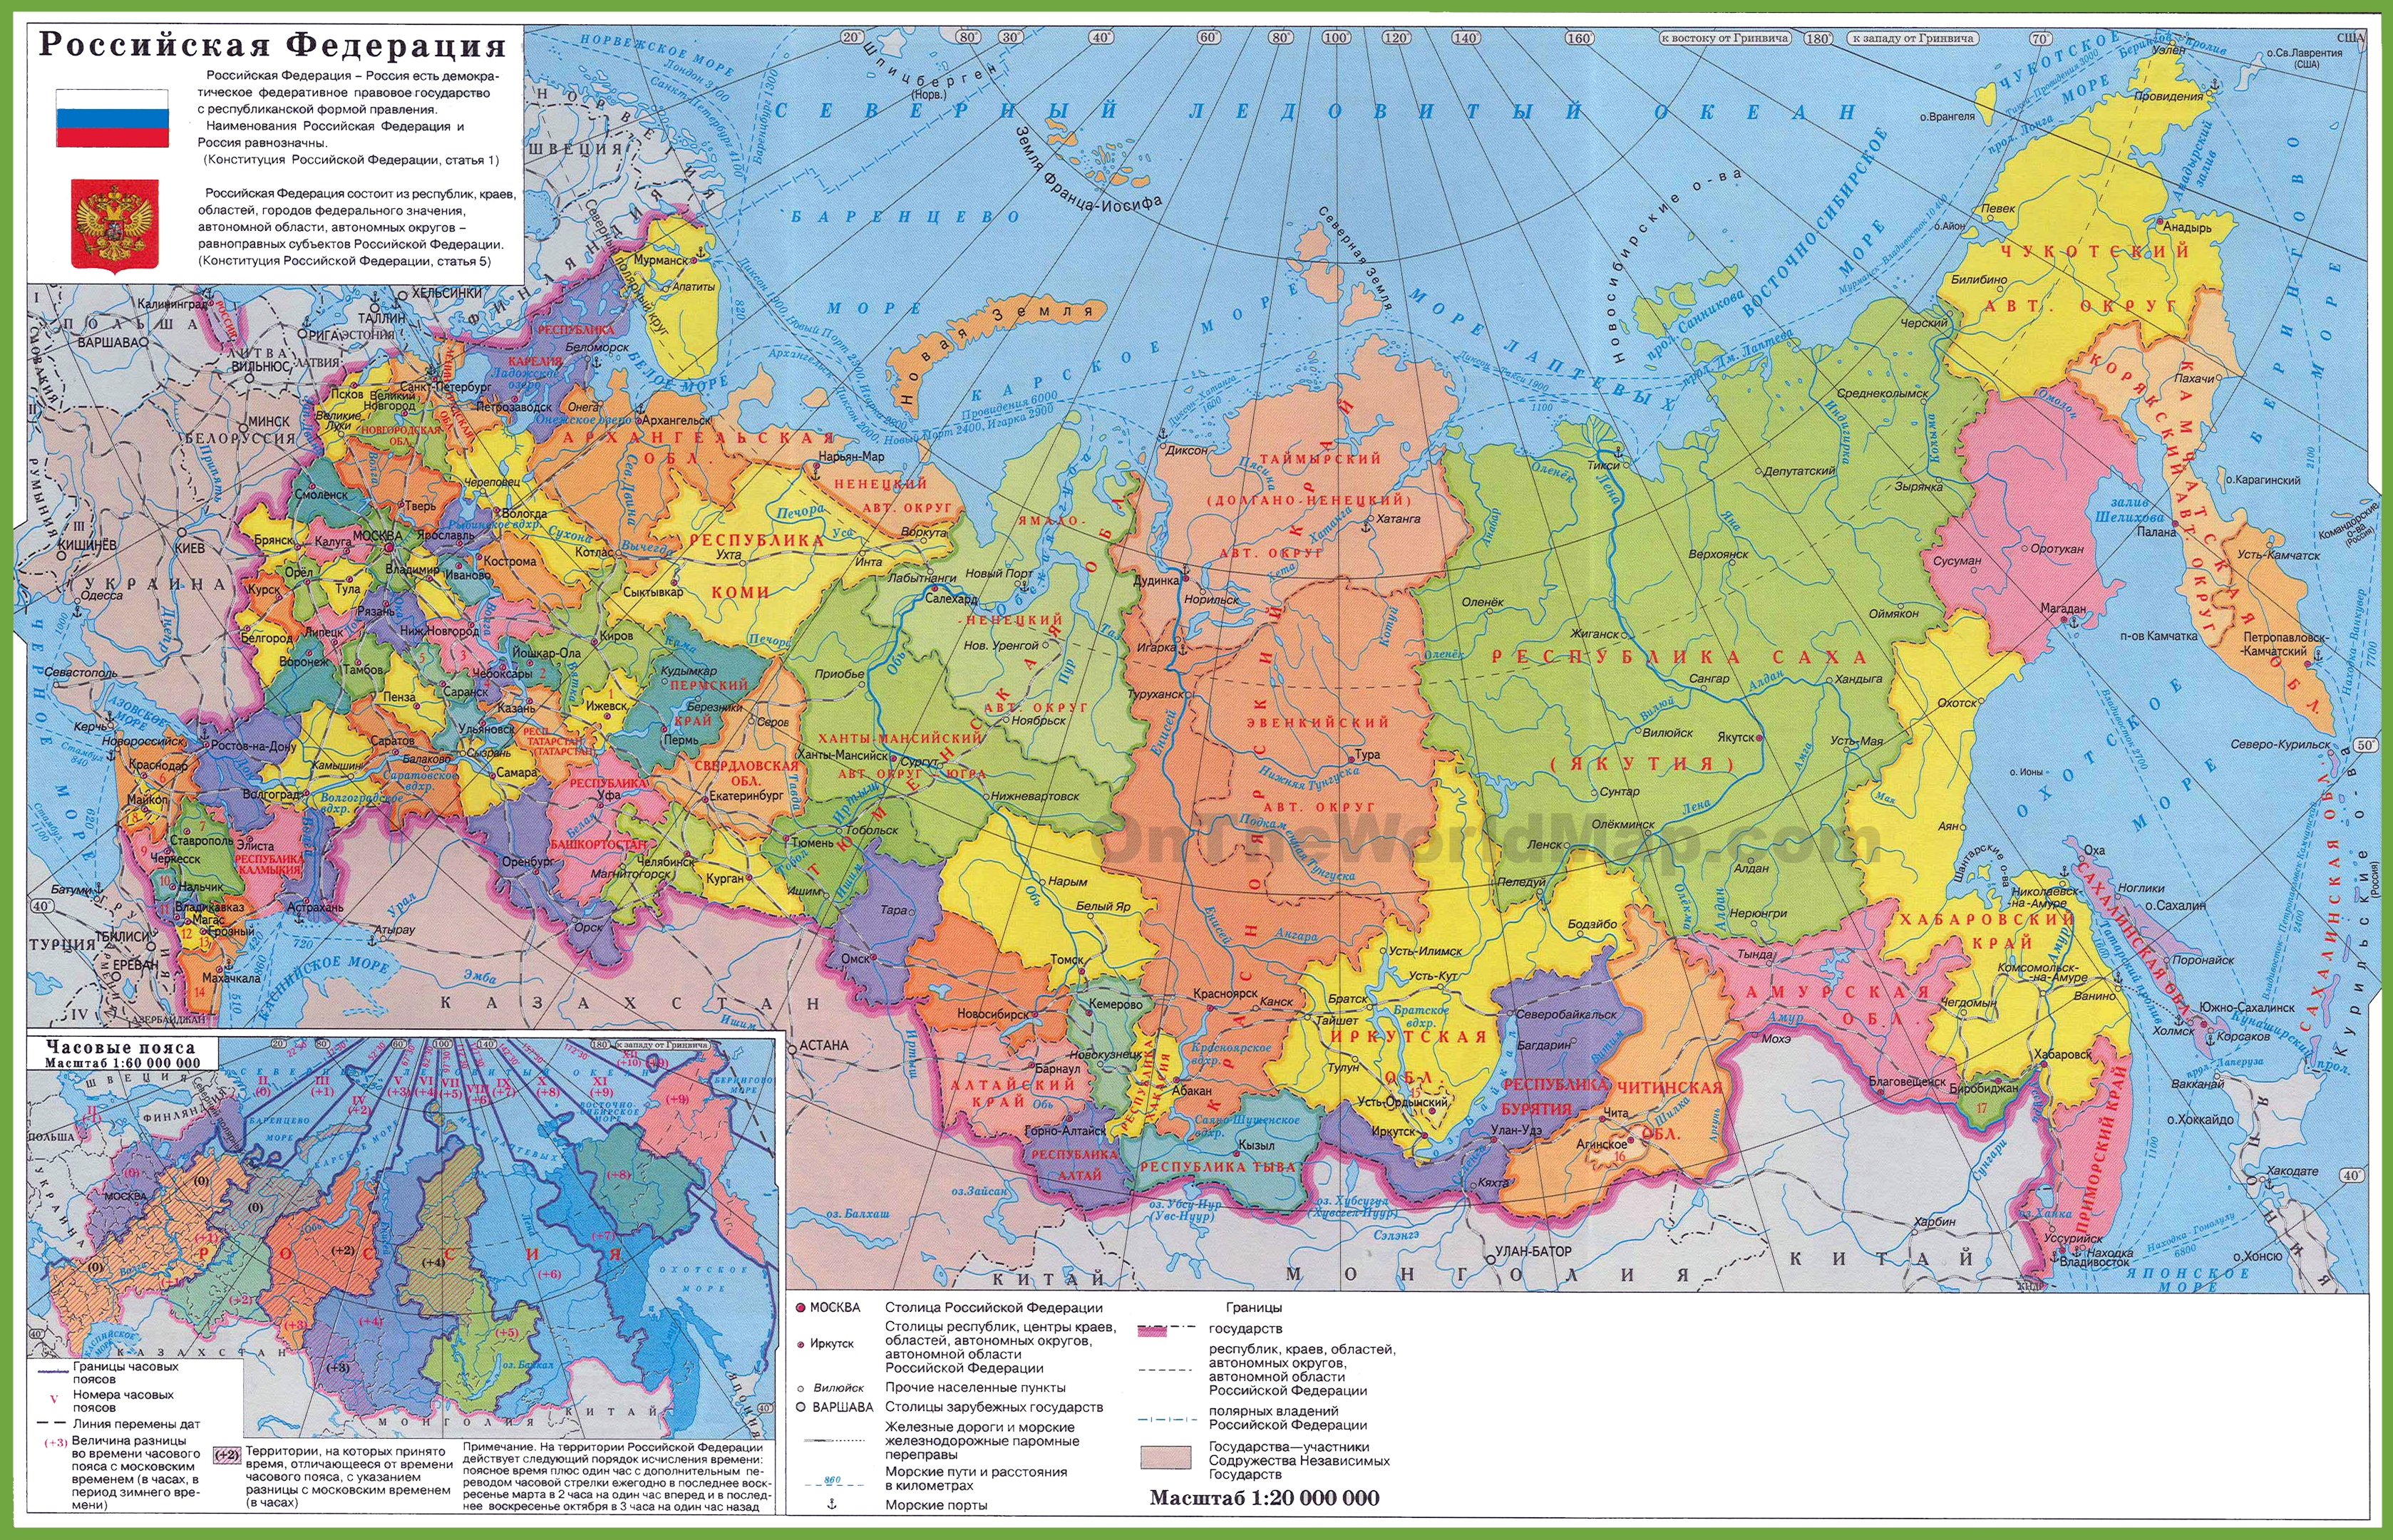 Russia Maps | Maps of Russia (Russian Federation) ﻿